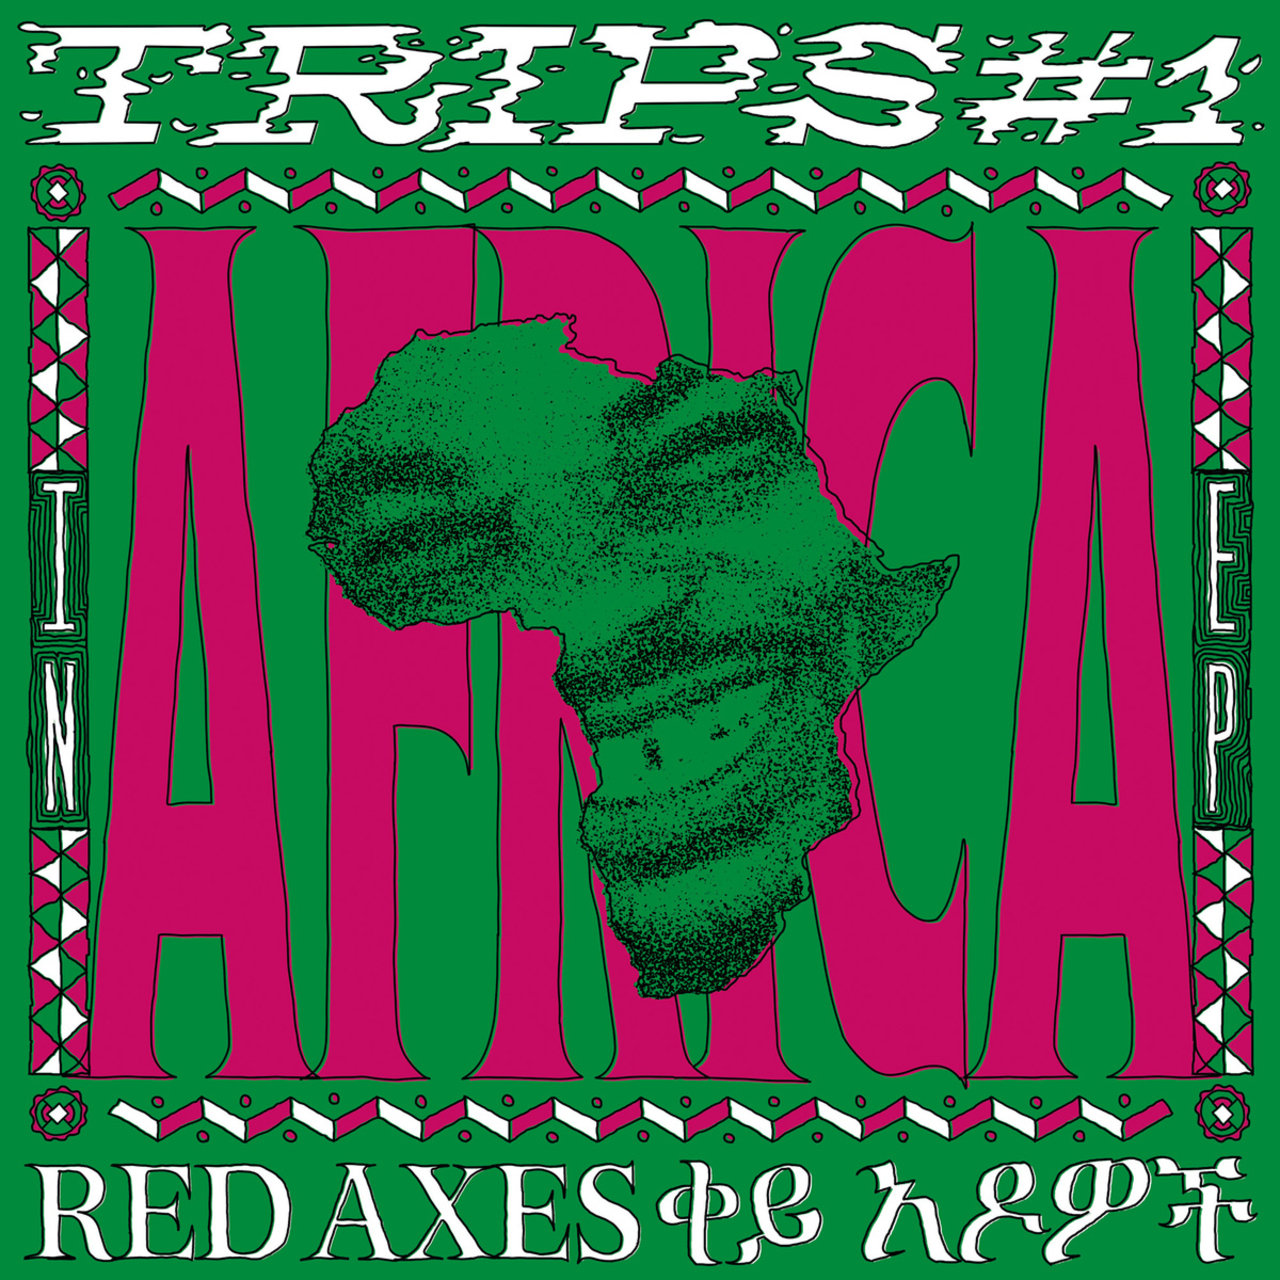 Red Axes - Trips #1: In Africa EP / K7 Records